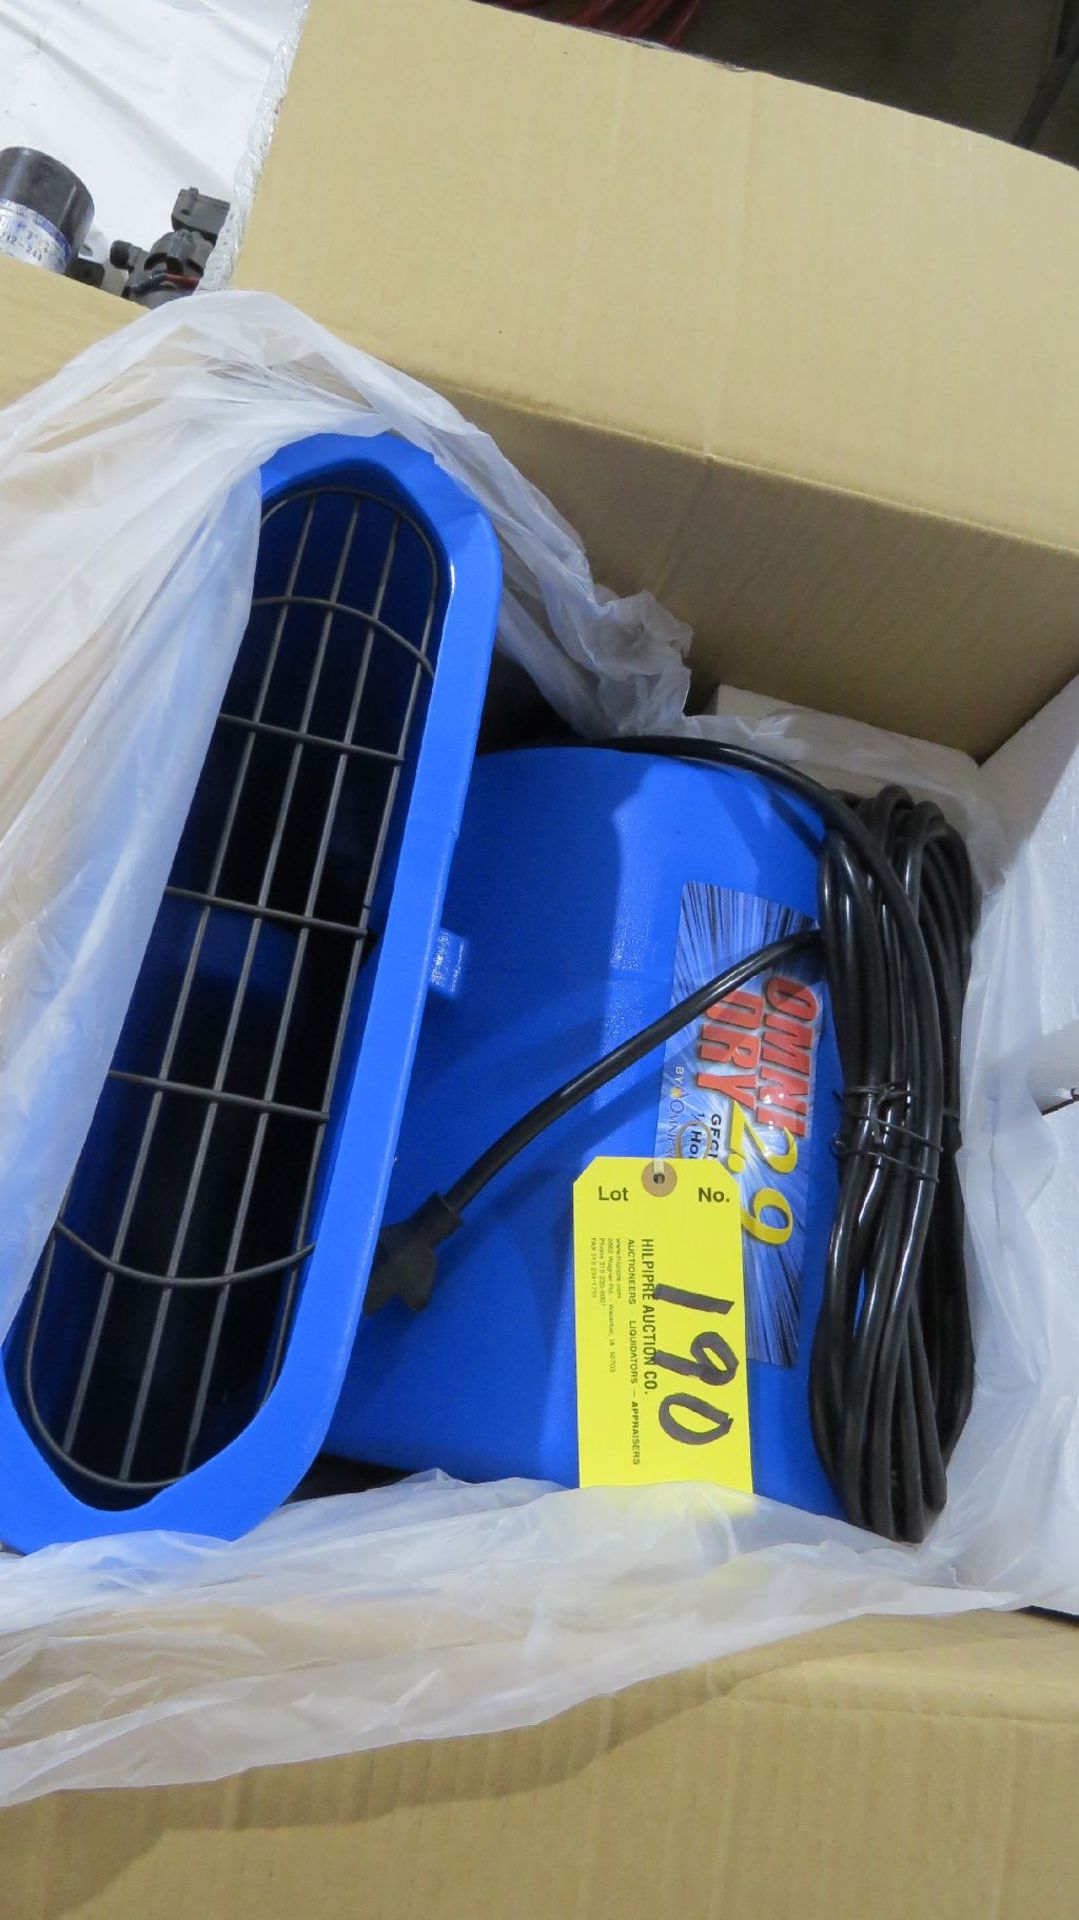 OMNI DRY #AP110004 air mover, (NEW in box). - Image 2 of 6